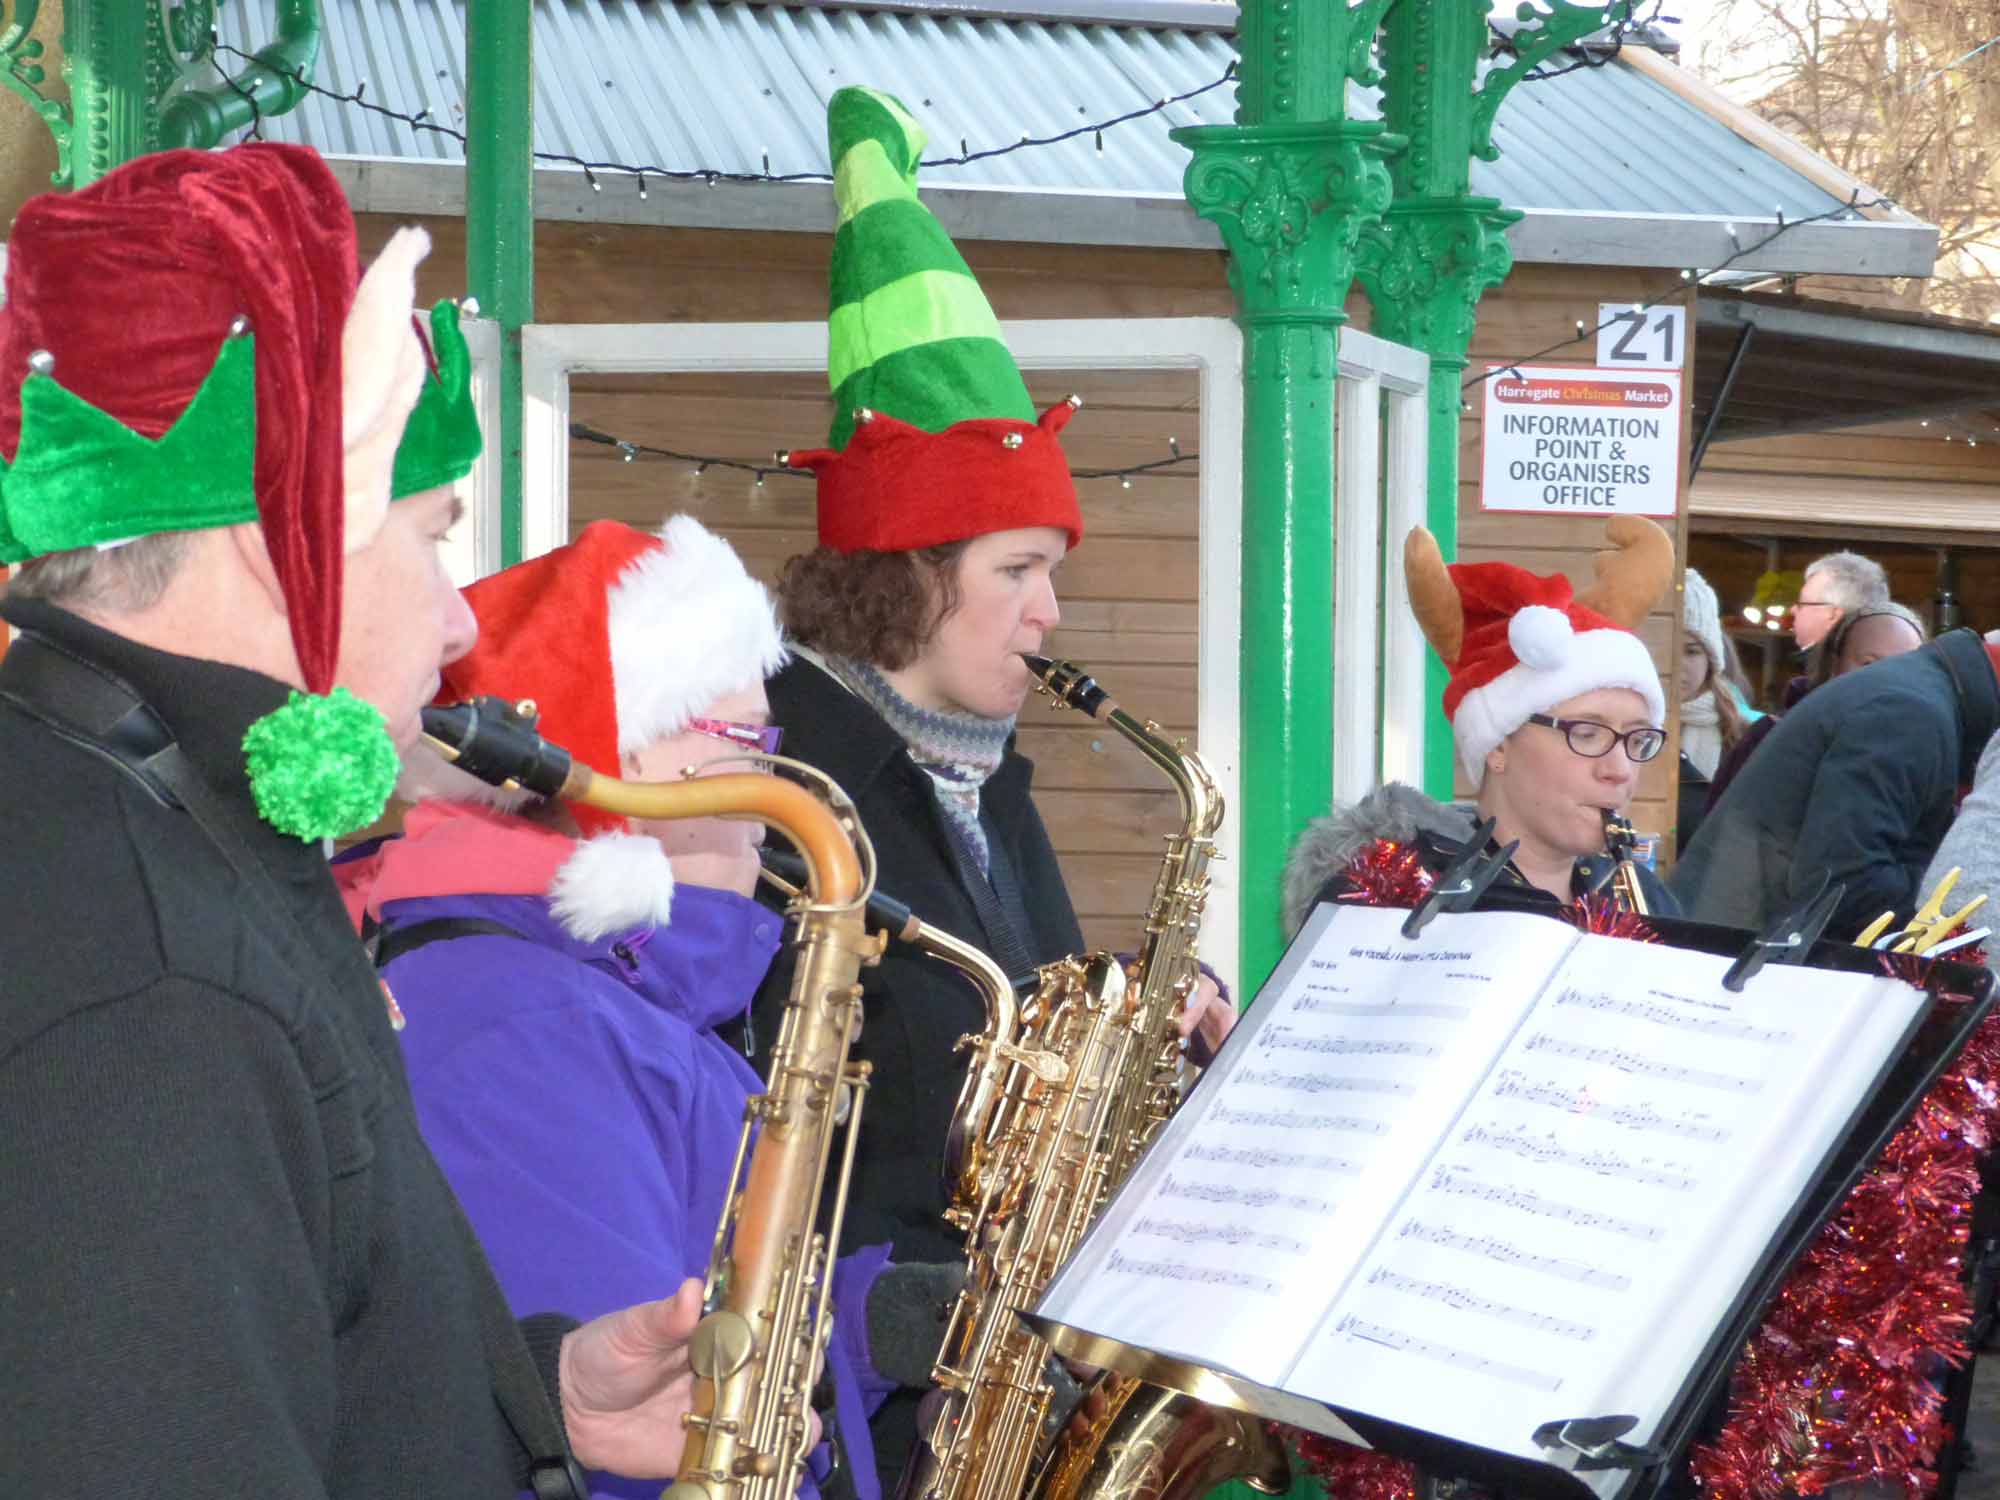 Musicians performing in the busking area at Harrogate Christmas Market in 2015